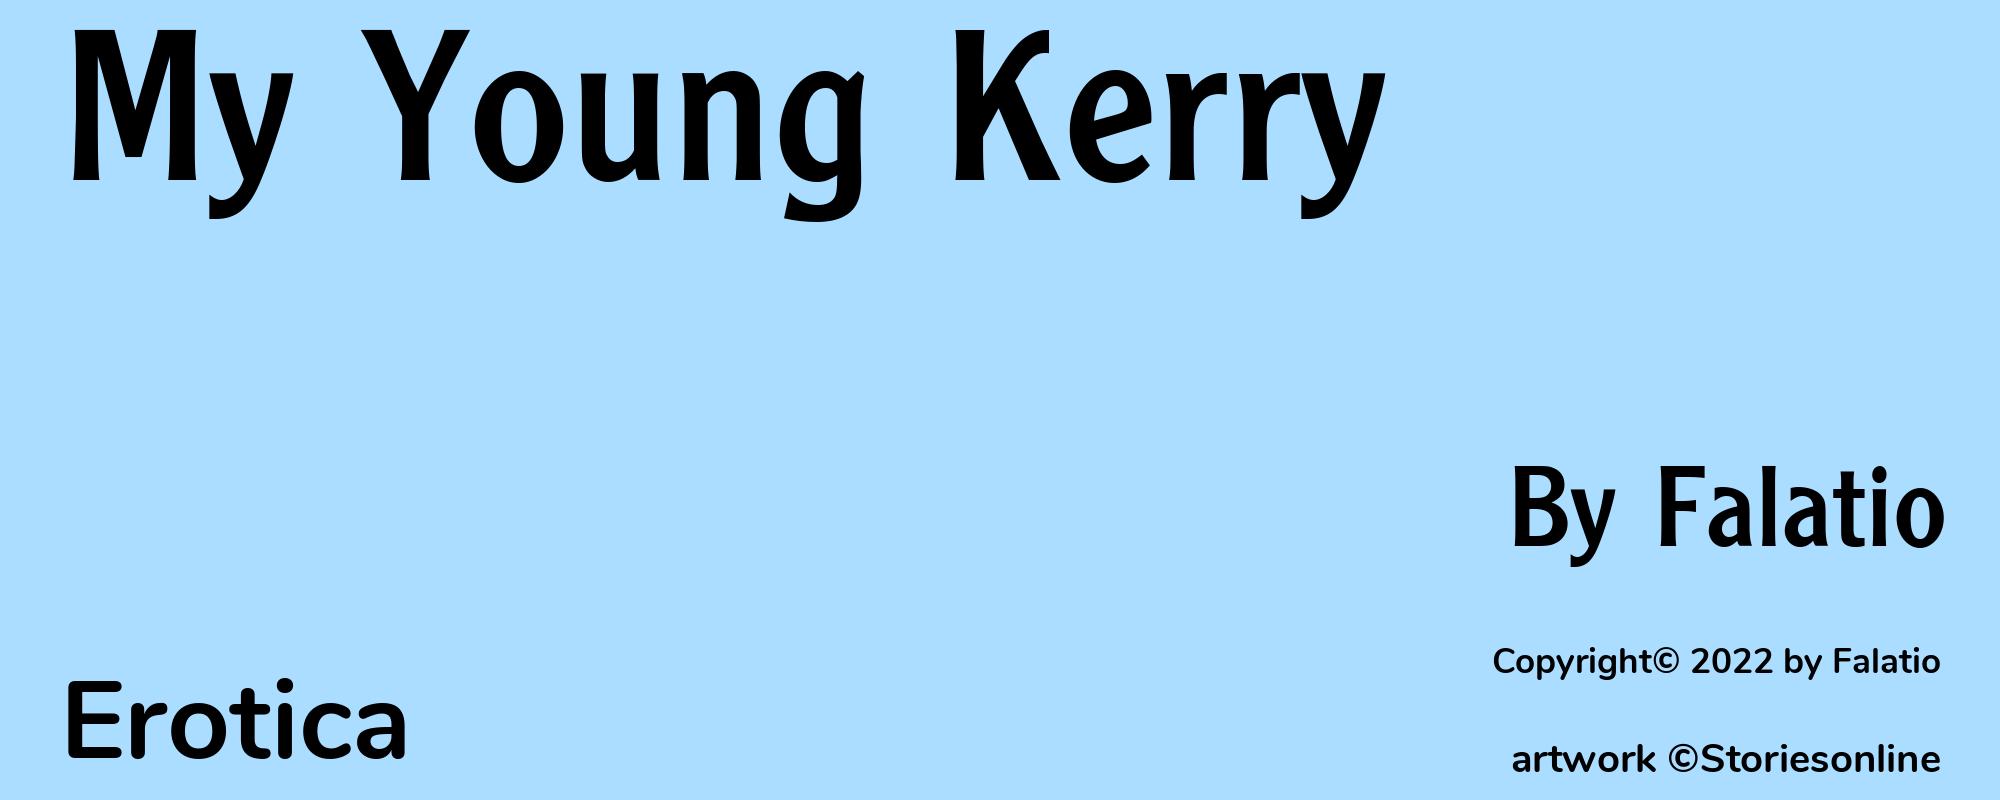 My Young Kerry - Cover